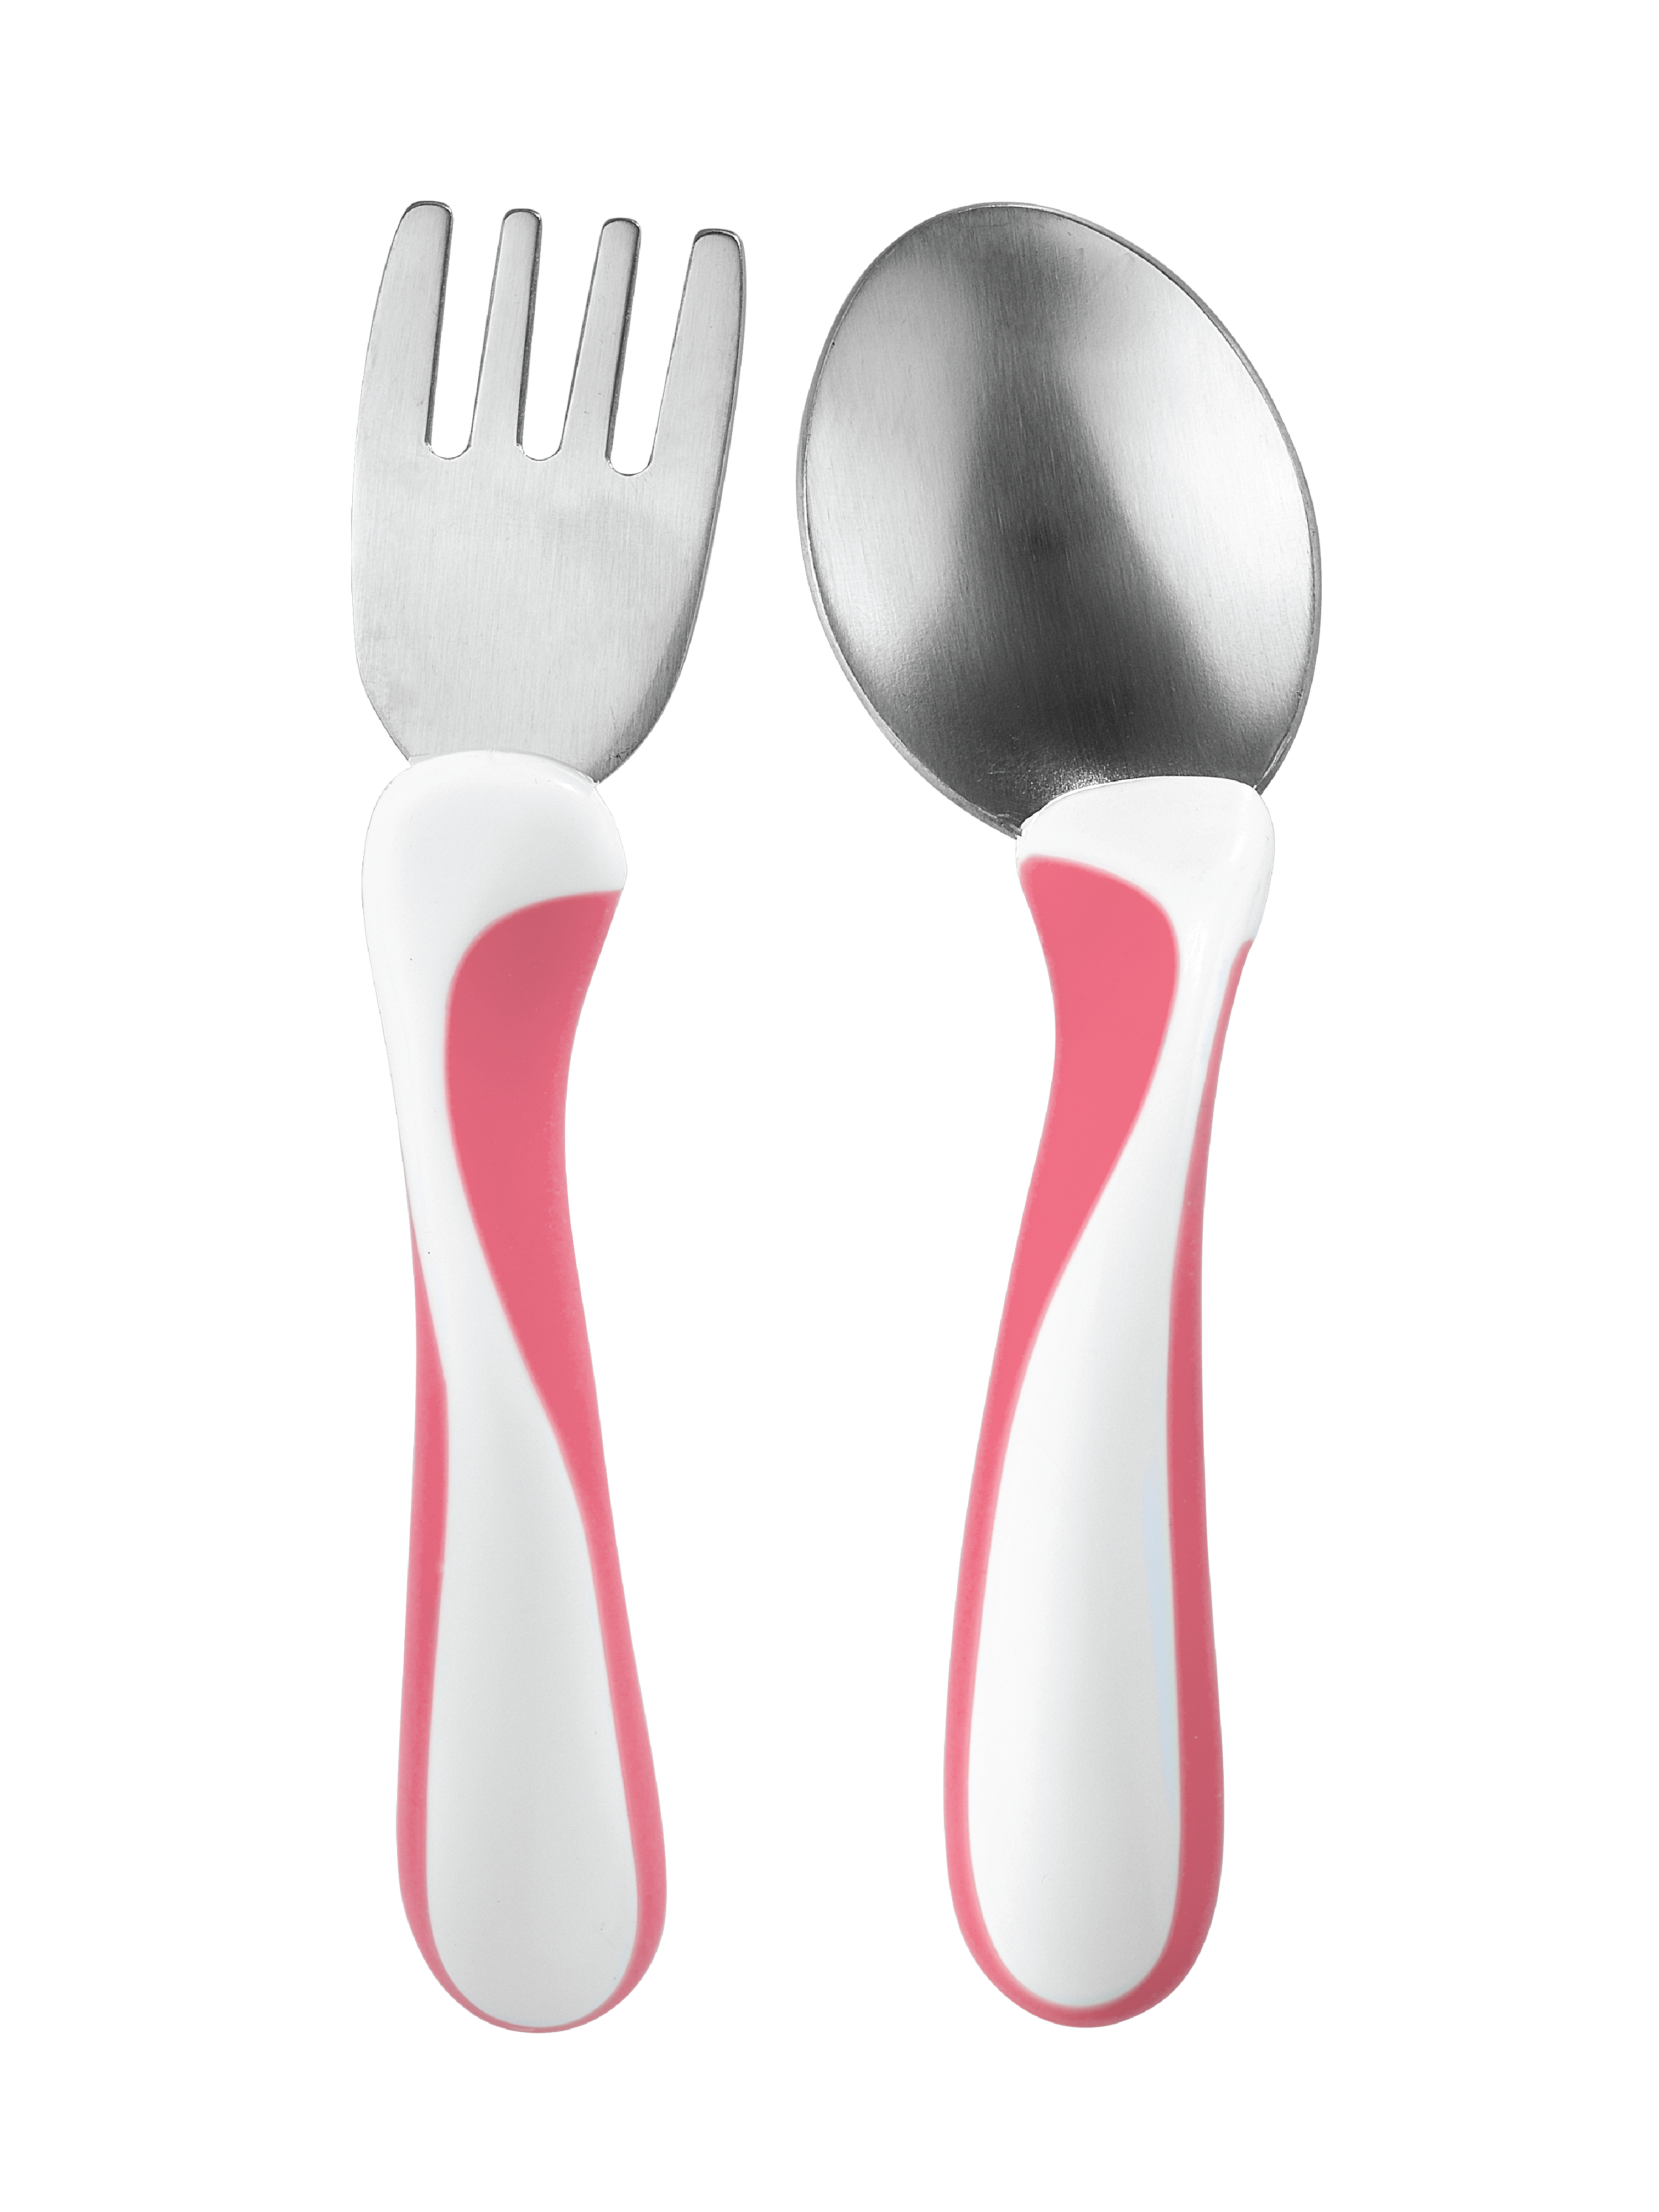 Bambino My First Spoon and Fork, Rosa, 1 stk.